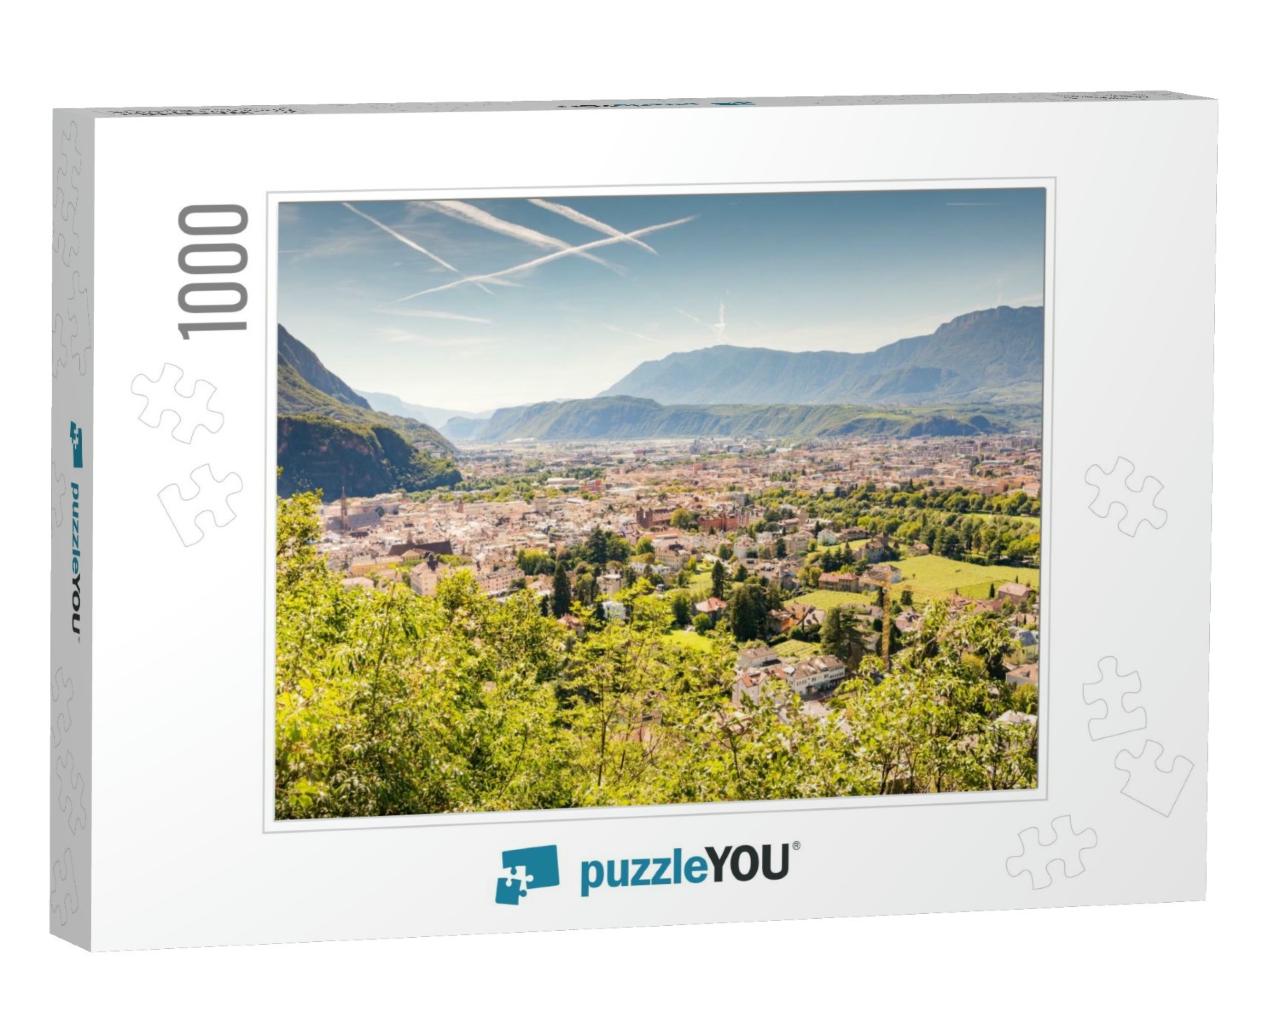 View Over the City of Bolzano Sout Tyrol, Italy... Jigsaw Puzzle with 1000 pieces